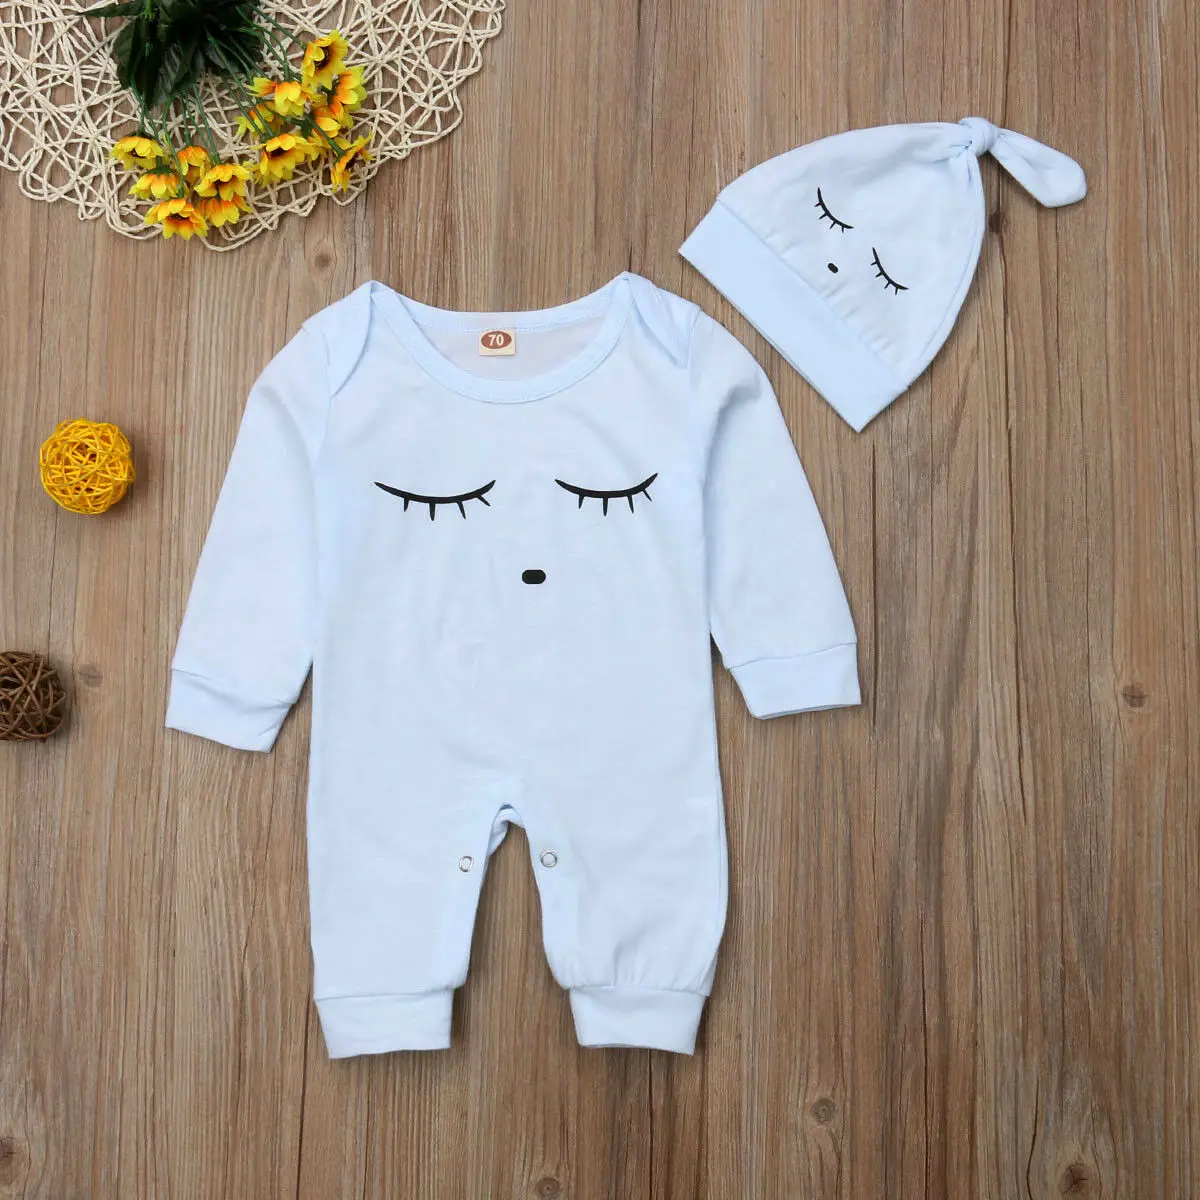 H.eternal Romper Thicken Layette Romper Jumpsuit Outwear Cotton Cute Outfits Long Sleeve Bodysuit Coveralls Sleepsuit Outfits Cartoon Clothes